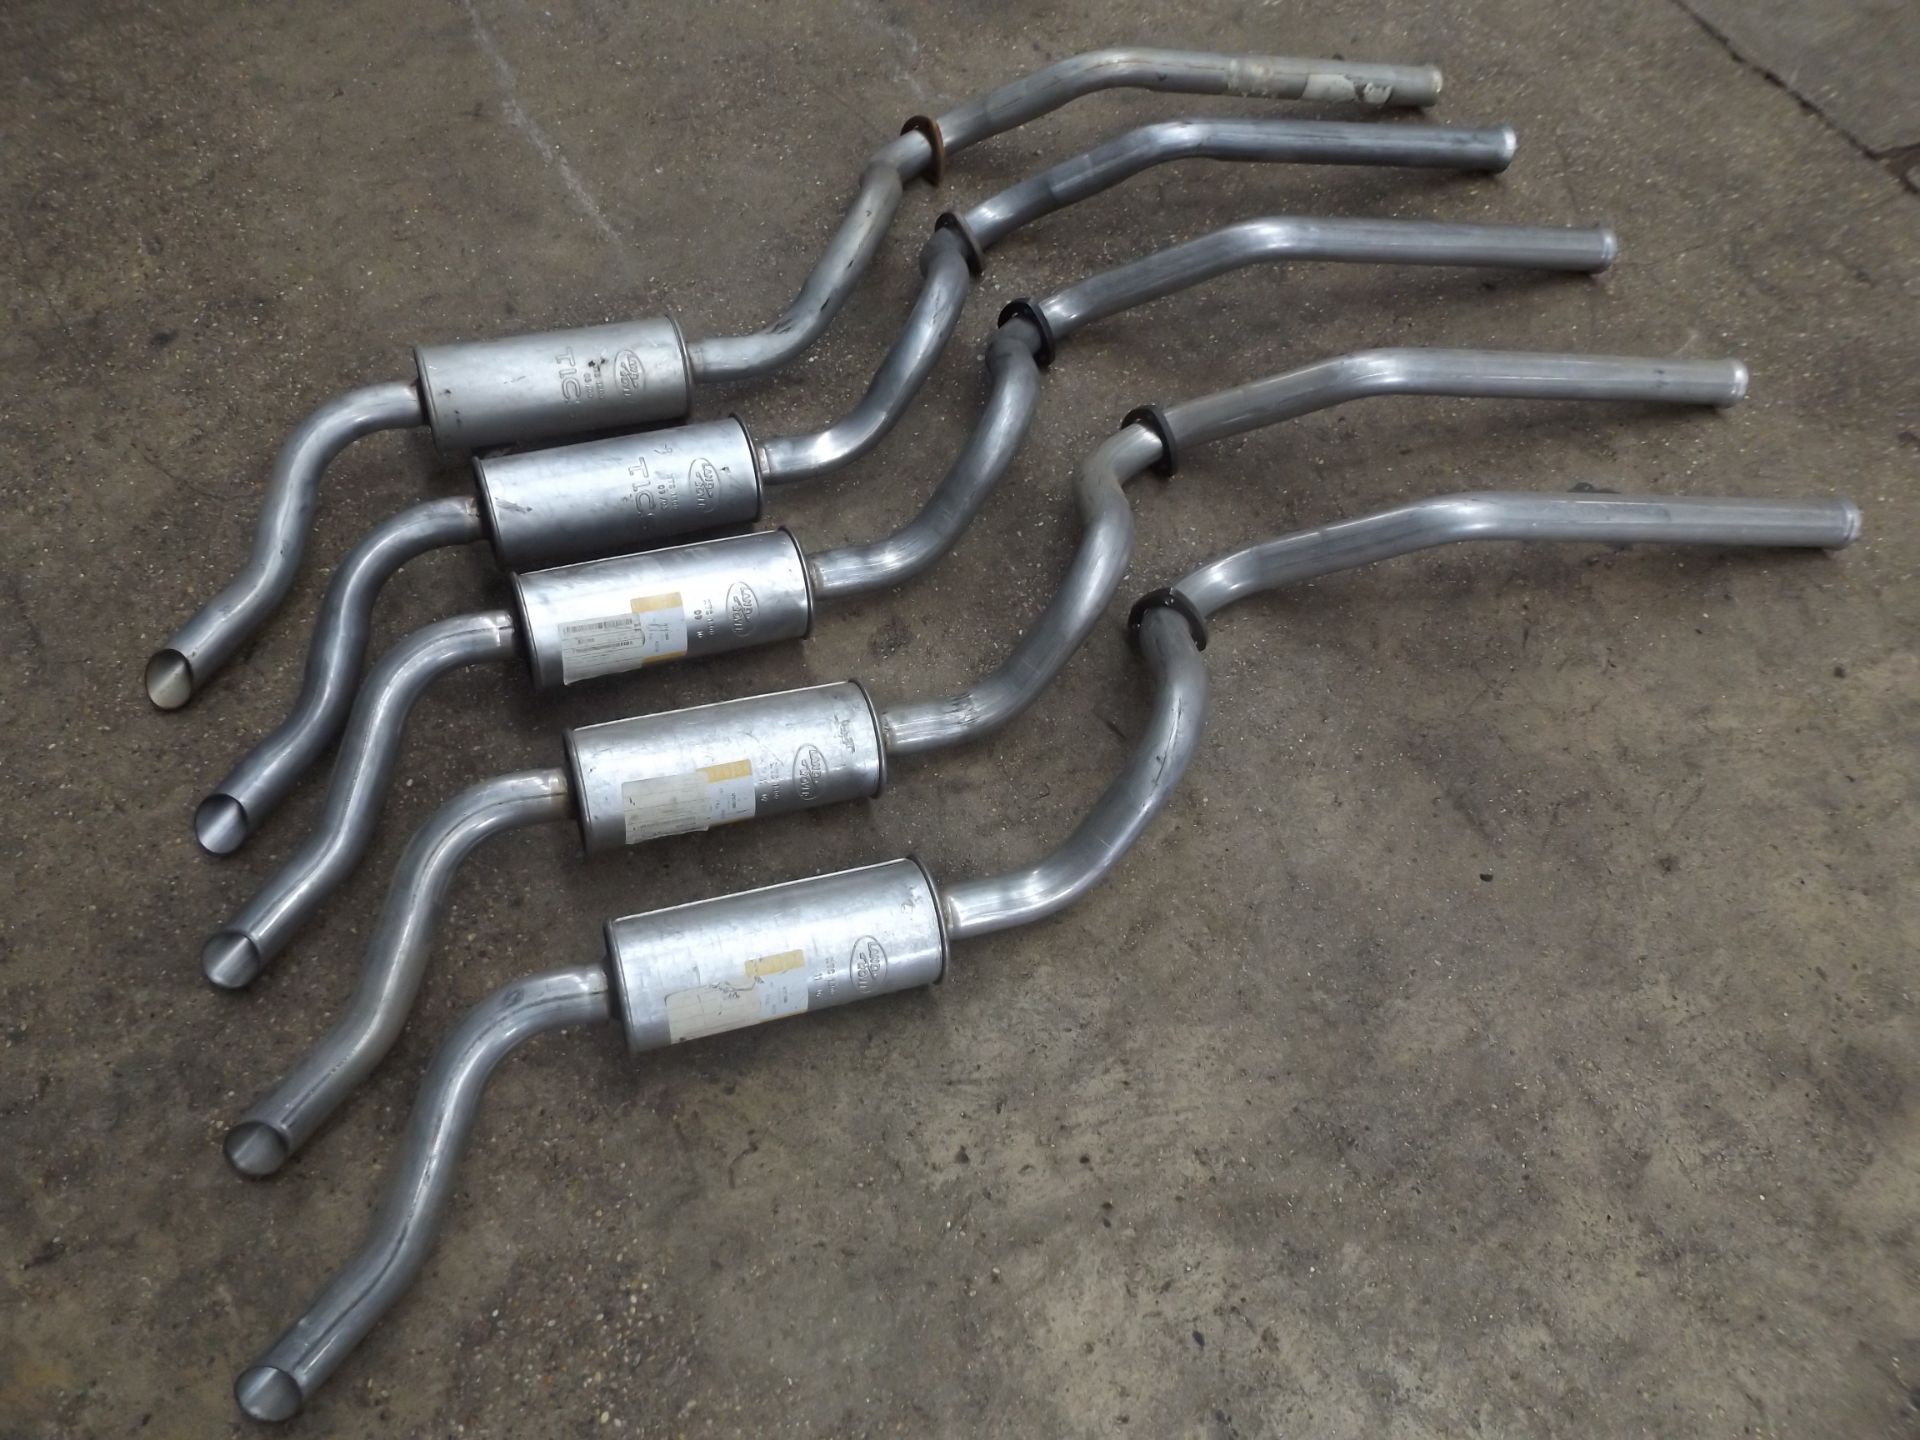 5 x Land Rover NTC1800 Rear Tailpipe and Silencer